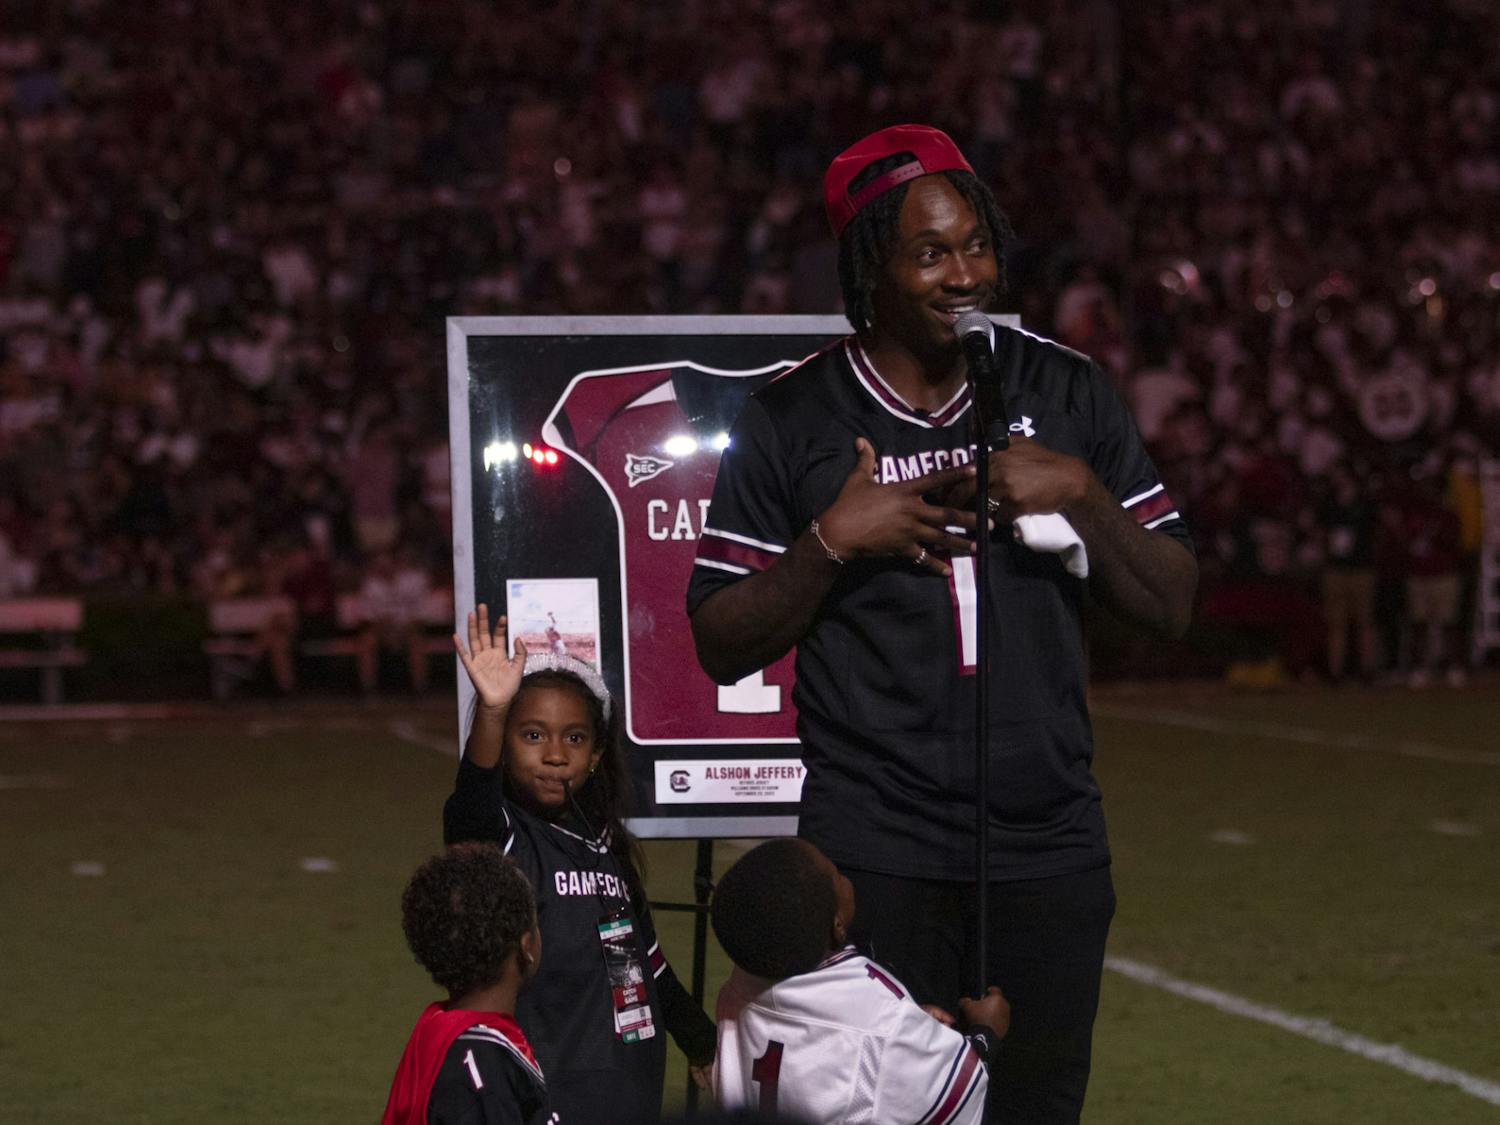 South Carolina All-America and All-SEC wide receiver Alshon Jeffery had his No. 1 jersey retired at Williams-Brice Stadium on Sep. 23, 2023. Jeffrey set the single-season school records in receiving yards (1,517) and in receptions (88).